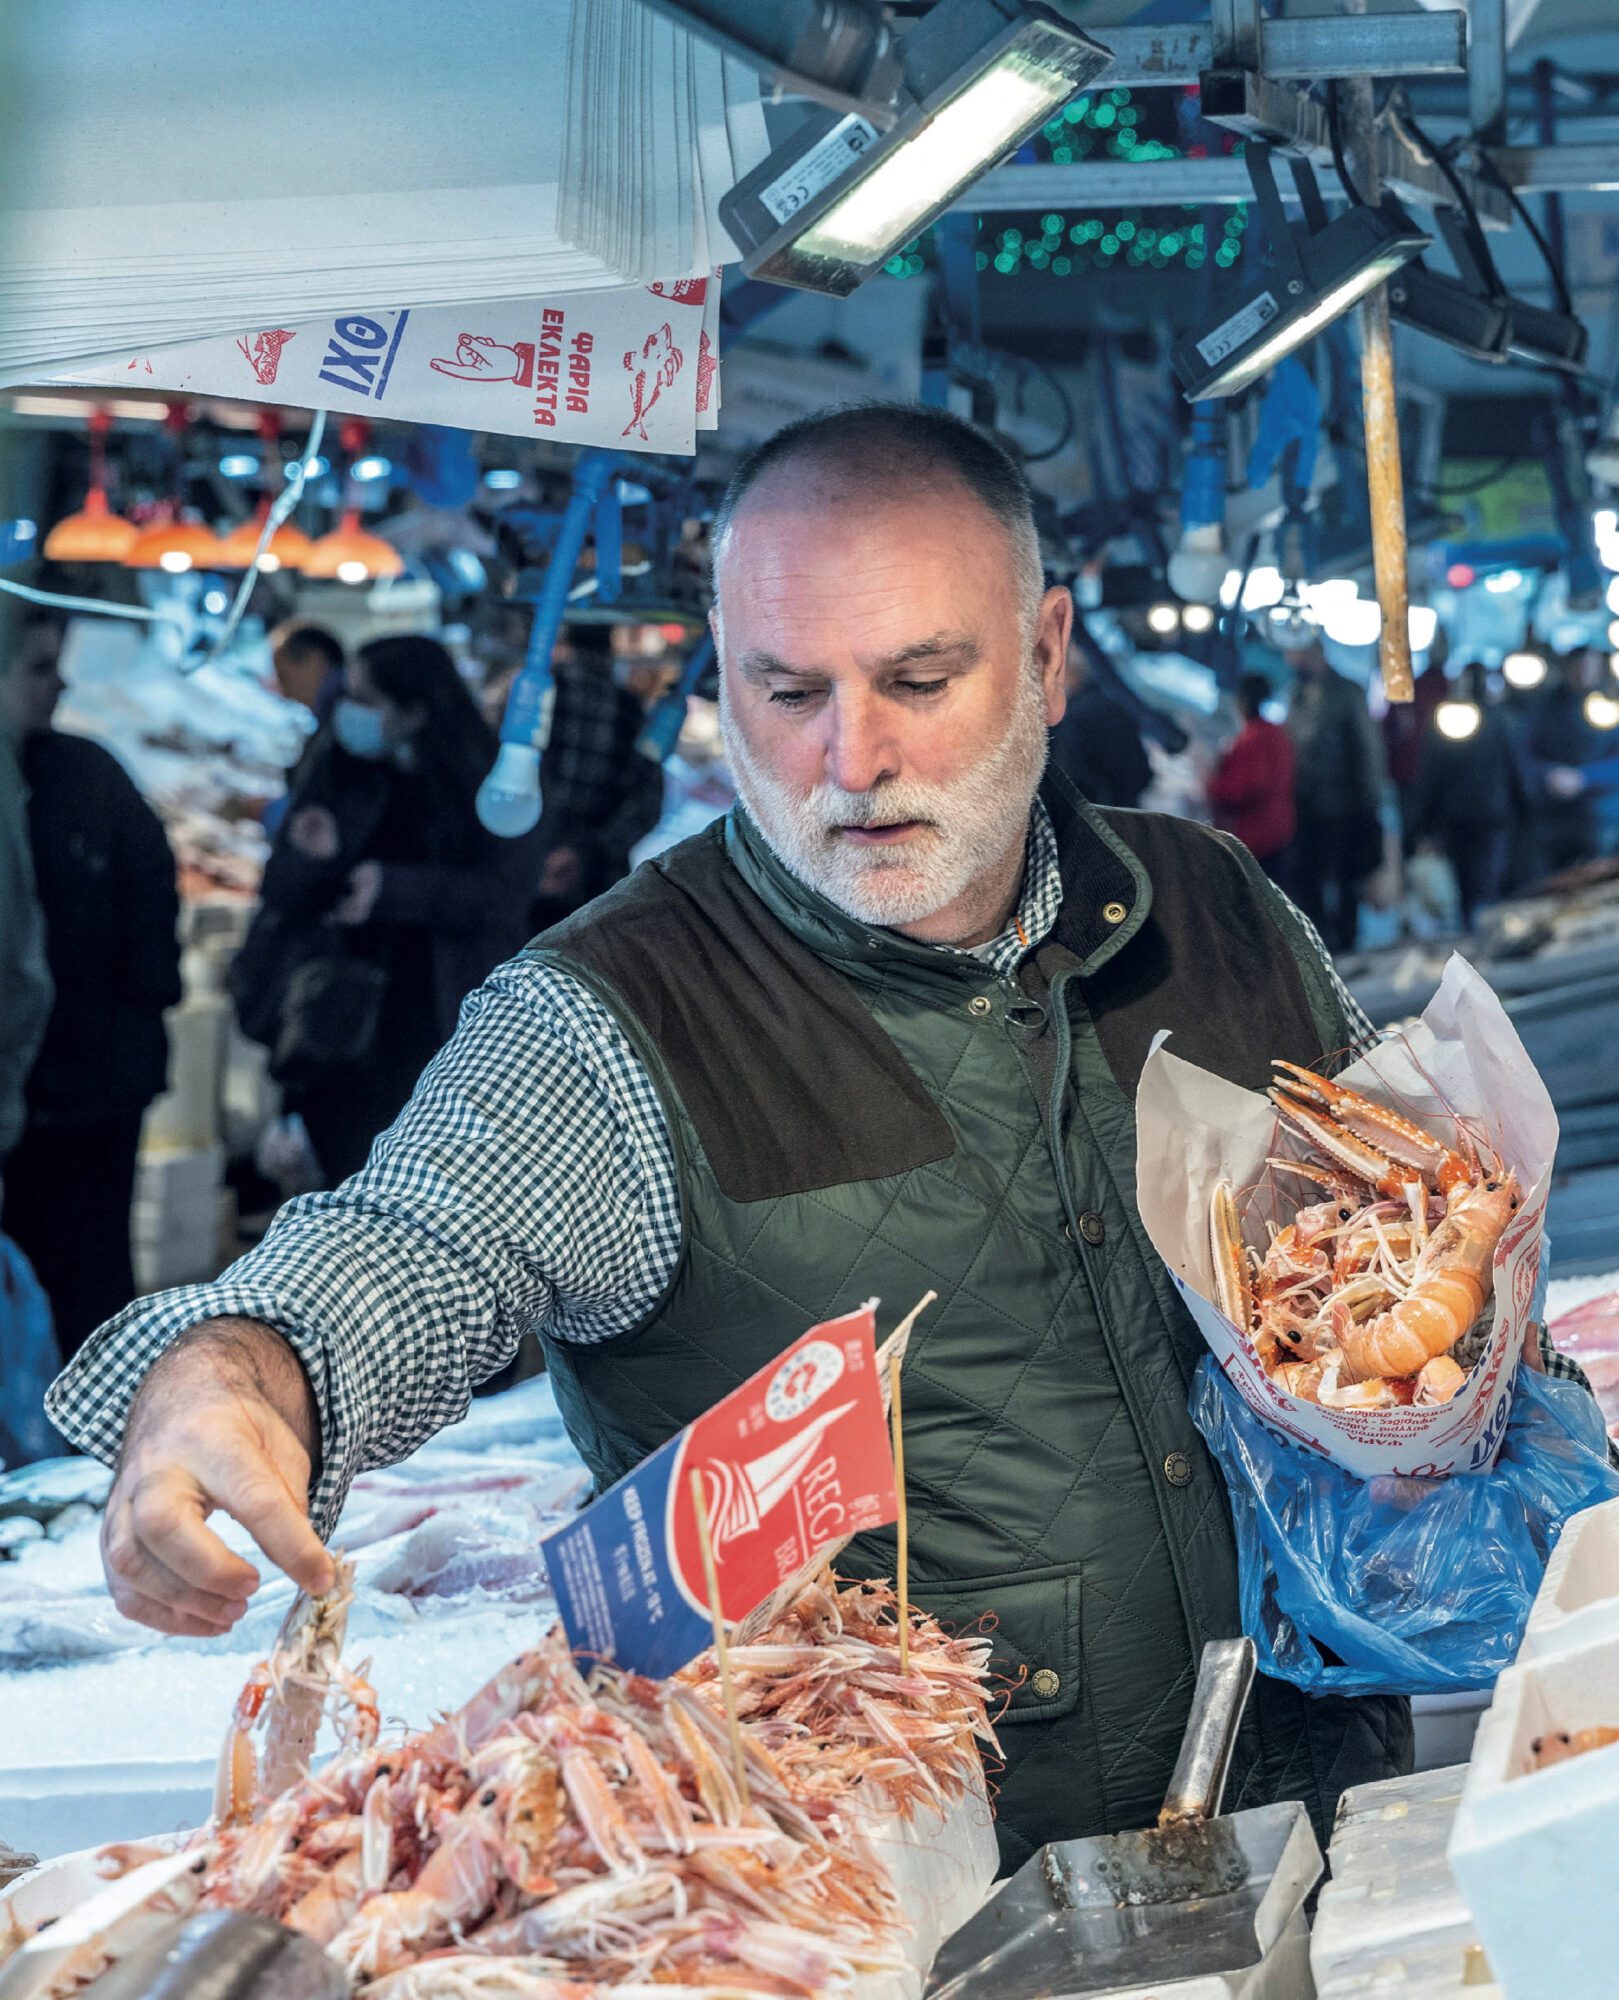 Chef Jose Andres shops at the Athens Central Market in Athens, Greece, in this undated handout image.  Thomas Schauer/Handout via REUTERS